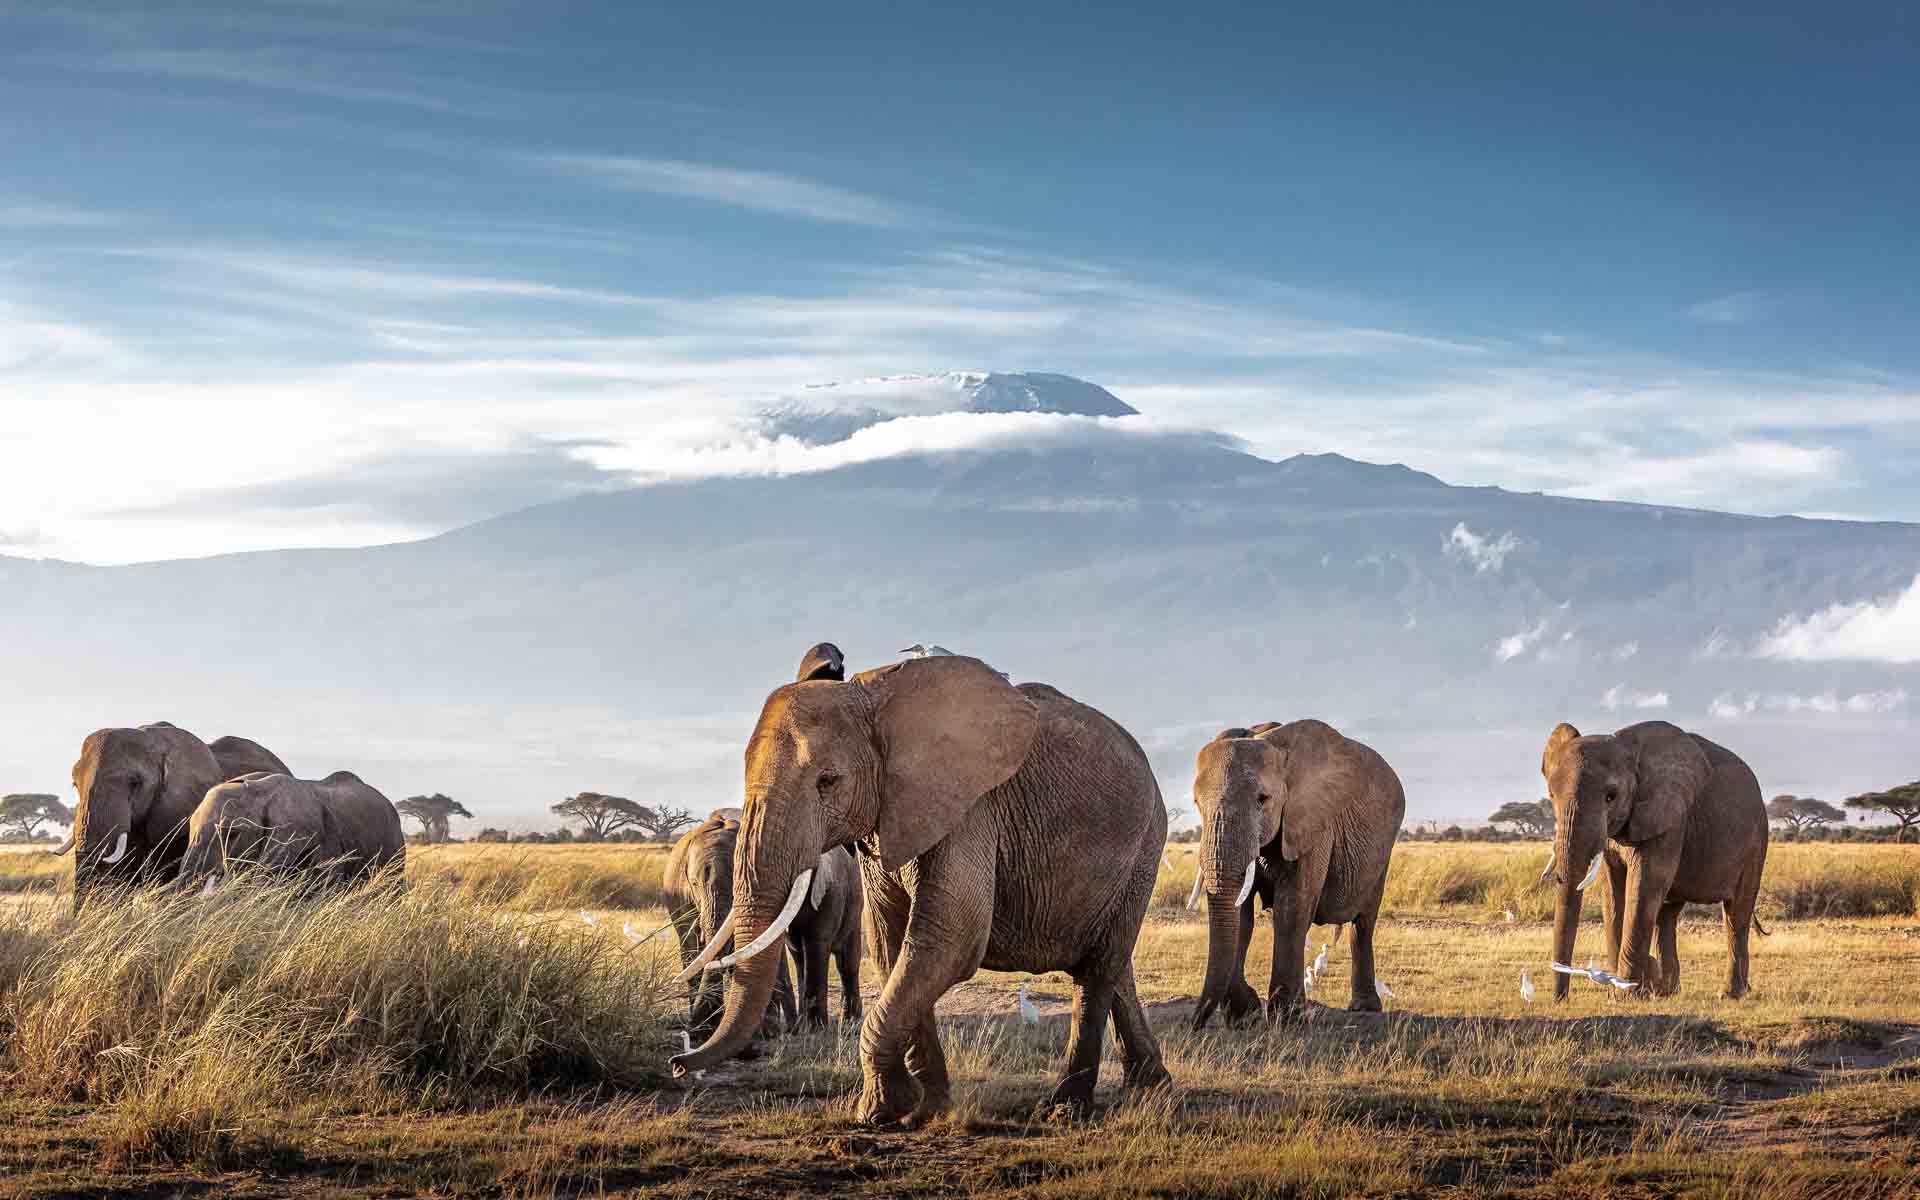 A herd of elephants walking with Mount Kilimanjaro in the background - one of the Seven Natural Wonders of Africa.